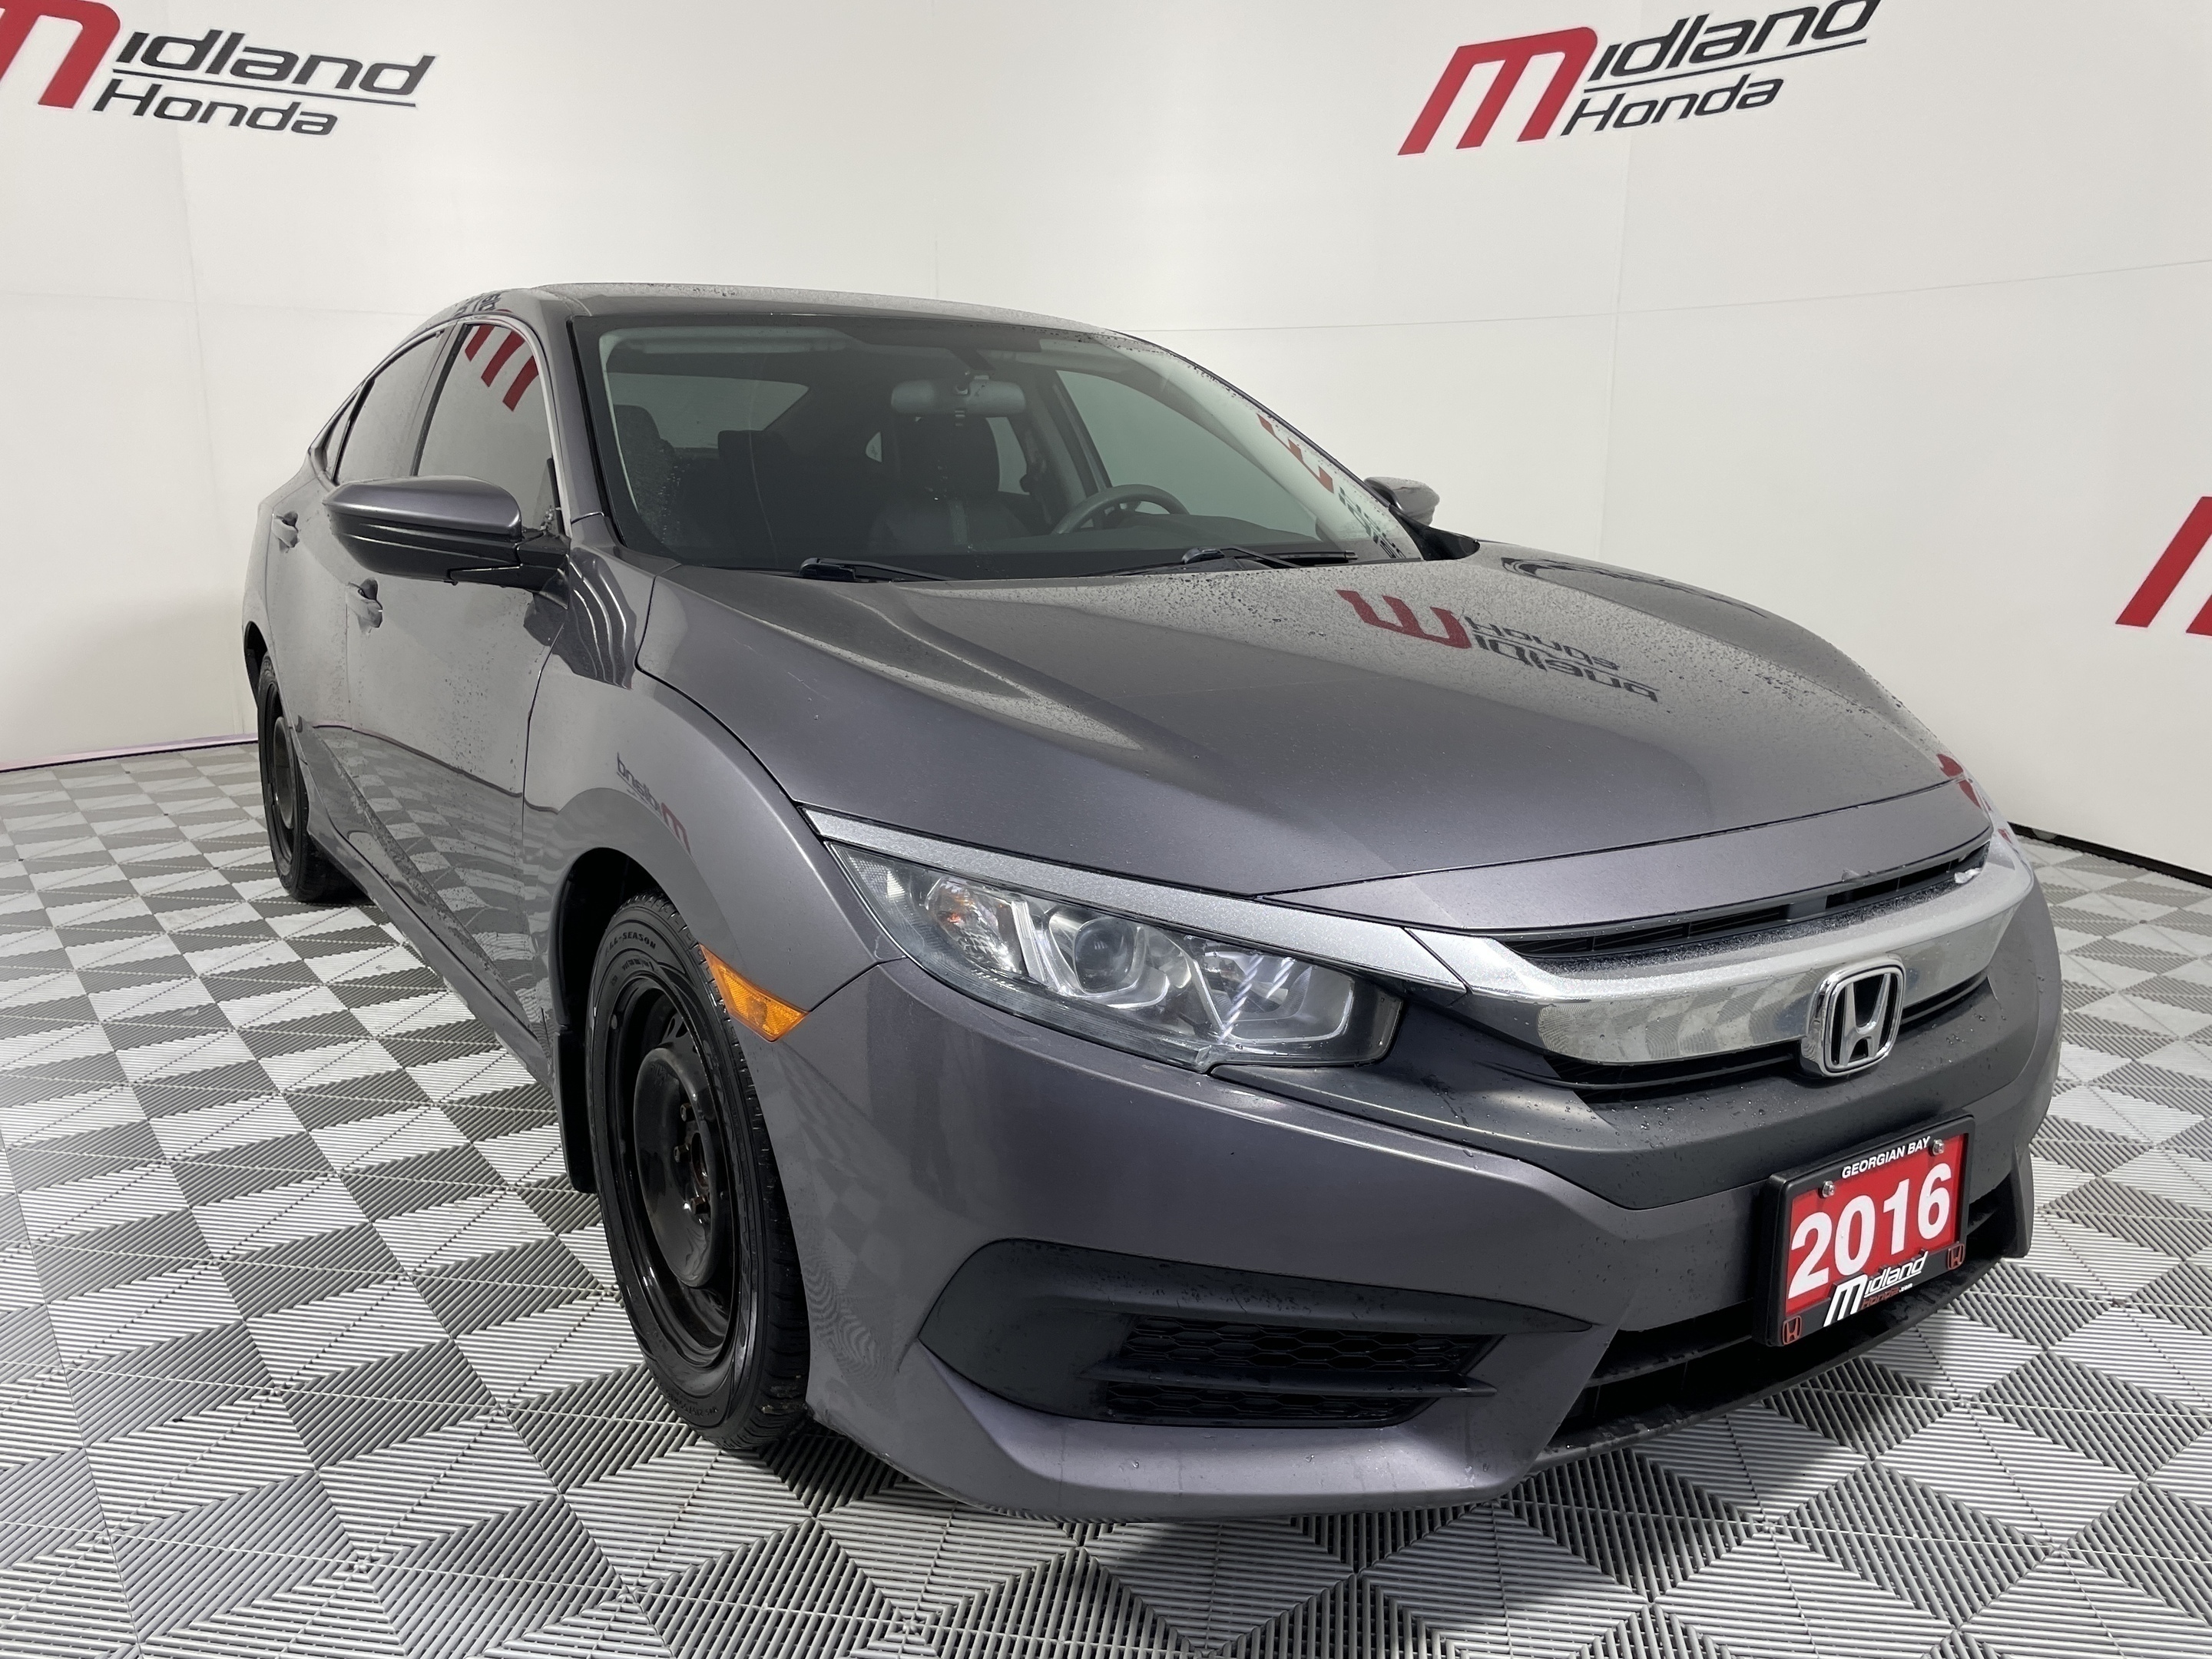 2016 Honda Civic LX Manual | Android/Apple | Dealer Safety!